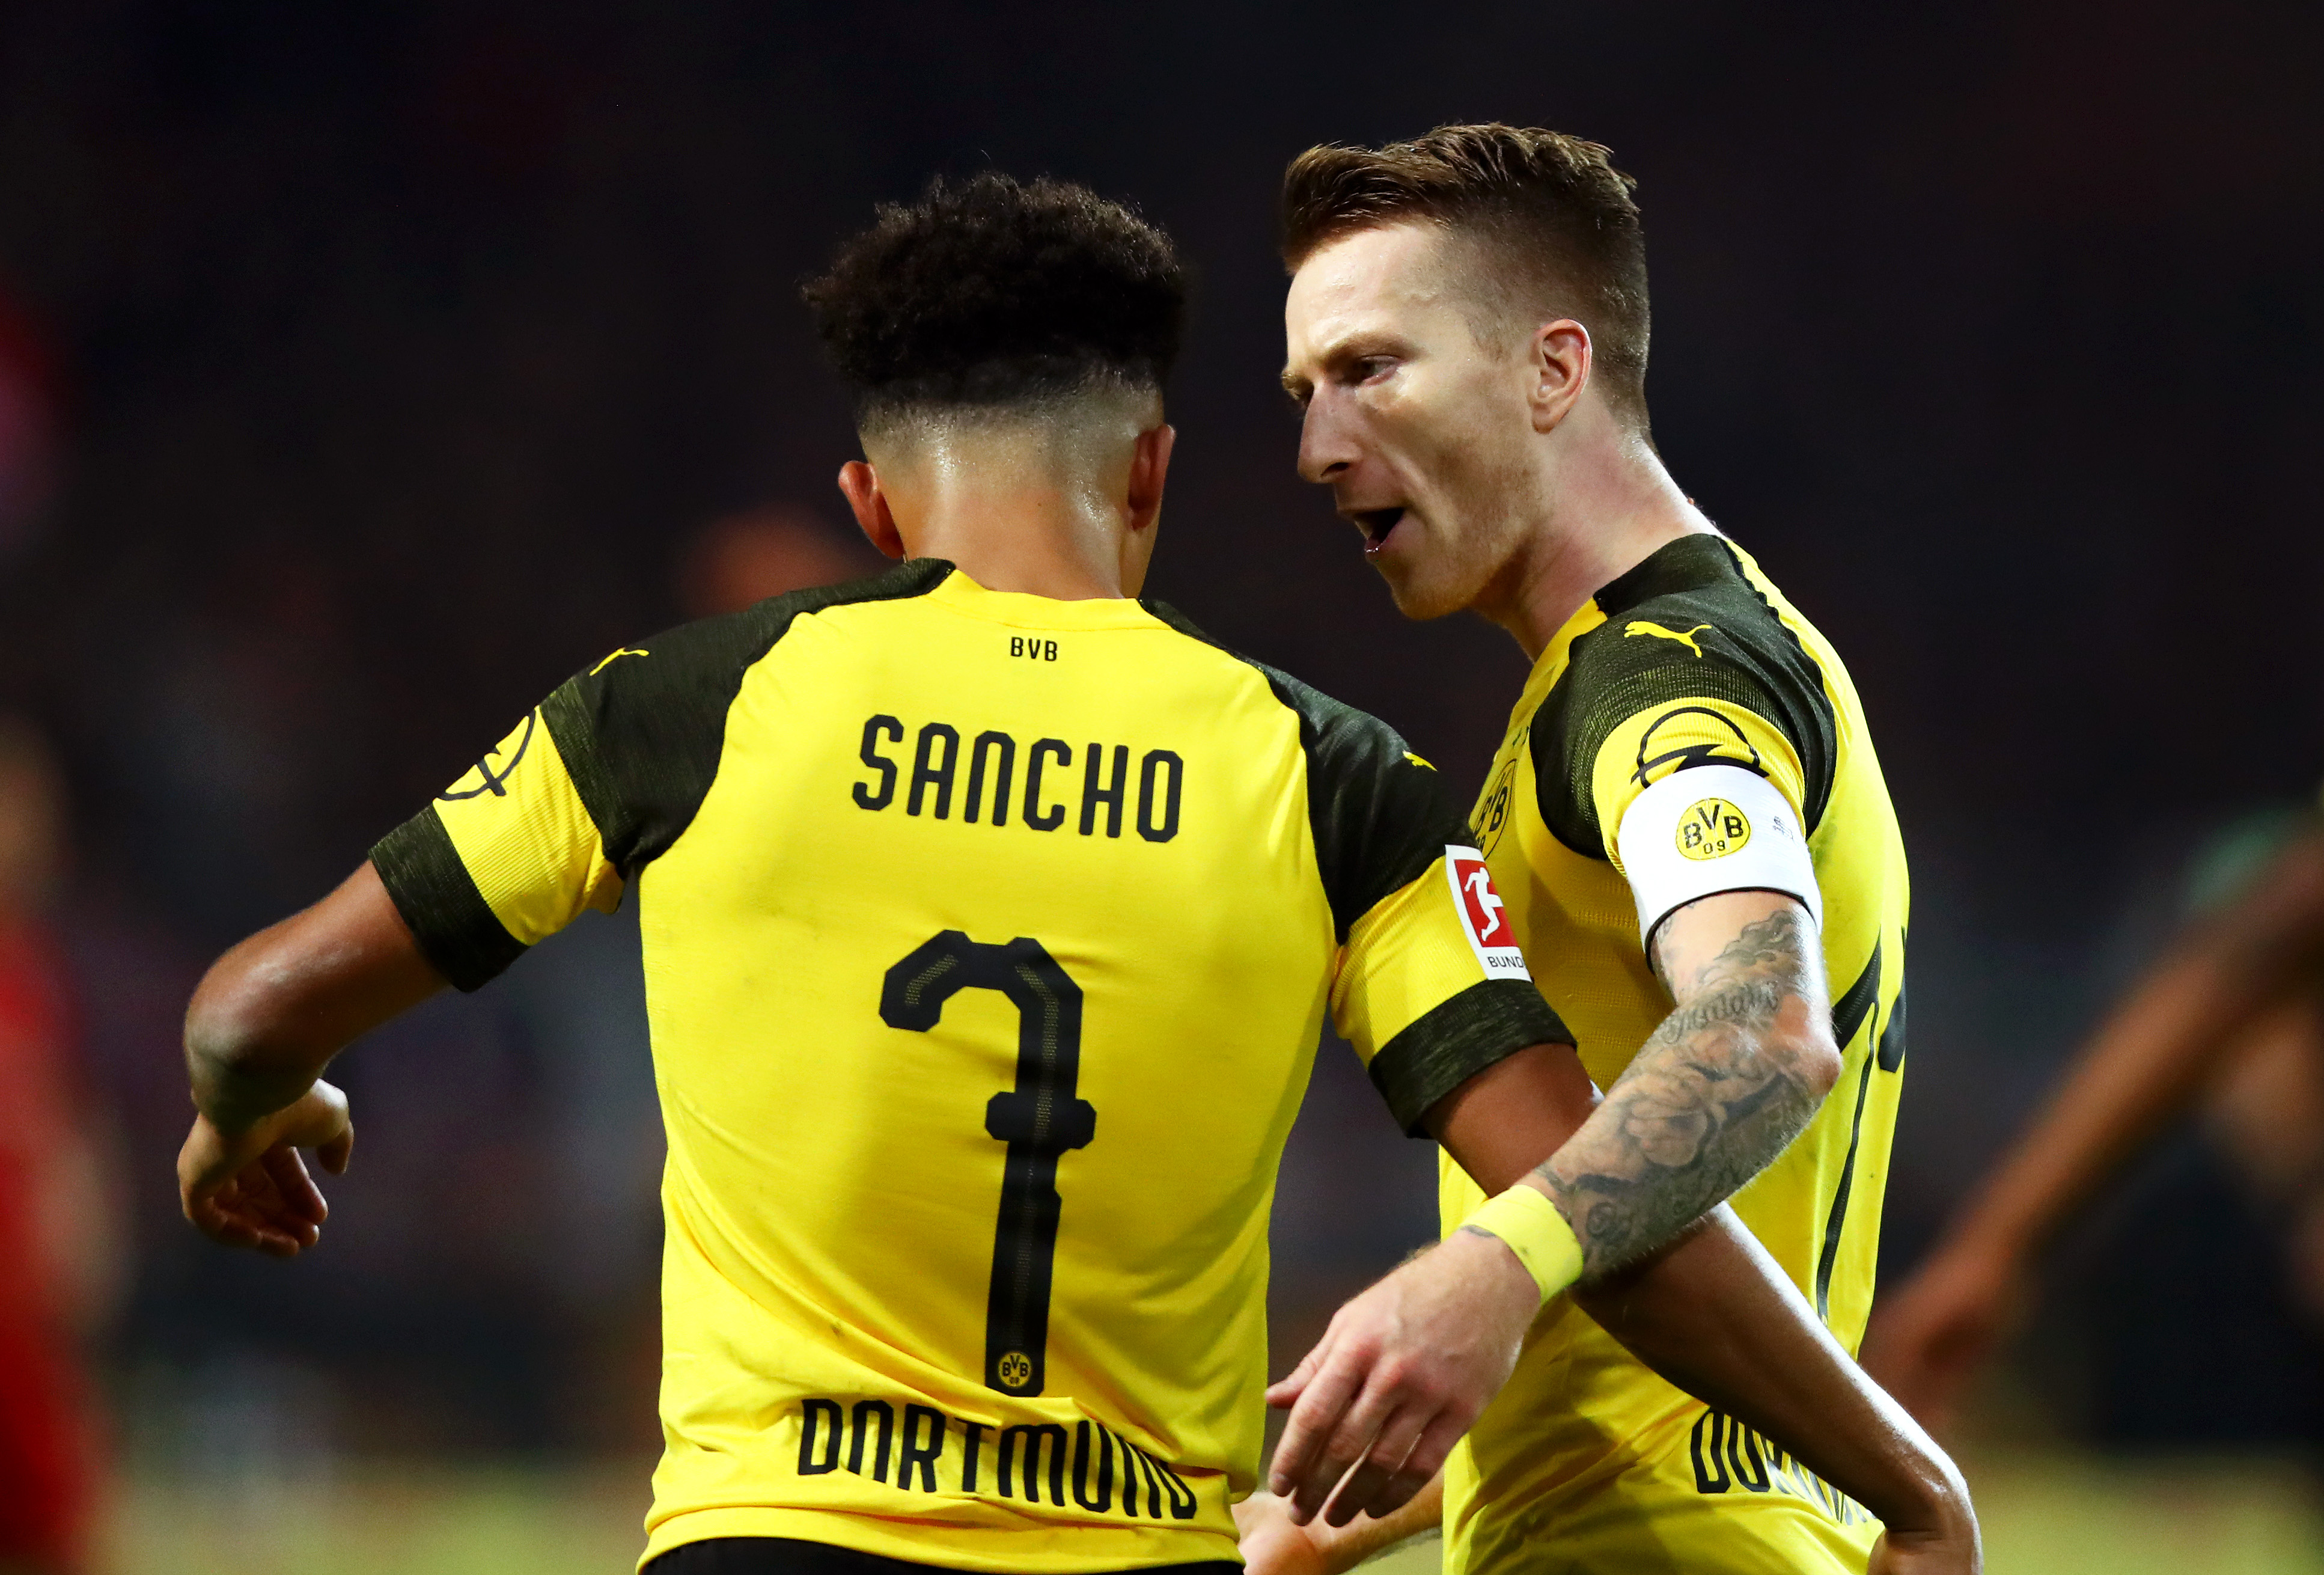 DORTMUND, GERMANY - NOVEMBER 10:  Marco Reus of Borussia Dortmund celebrates with teammate Jadon Sancho after scoring his team's second goal during the Bundesliga match between Borussia Dortmund and FC Bayern Muenchen at Signal Iduna Park on November 10, 2018 in Dortmund, Germany.  (Photo by Dean Mouhtaropoulos/Bongarts/Getty Images)